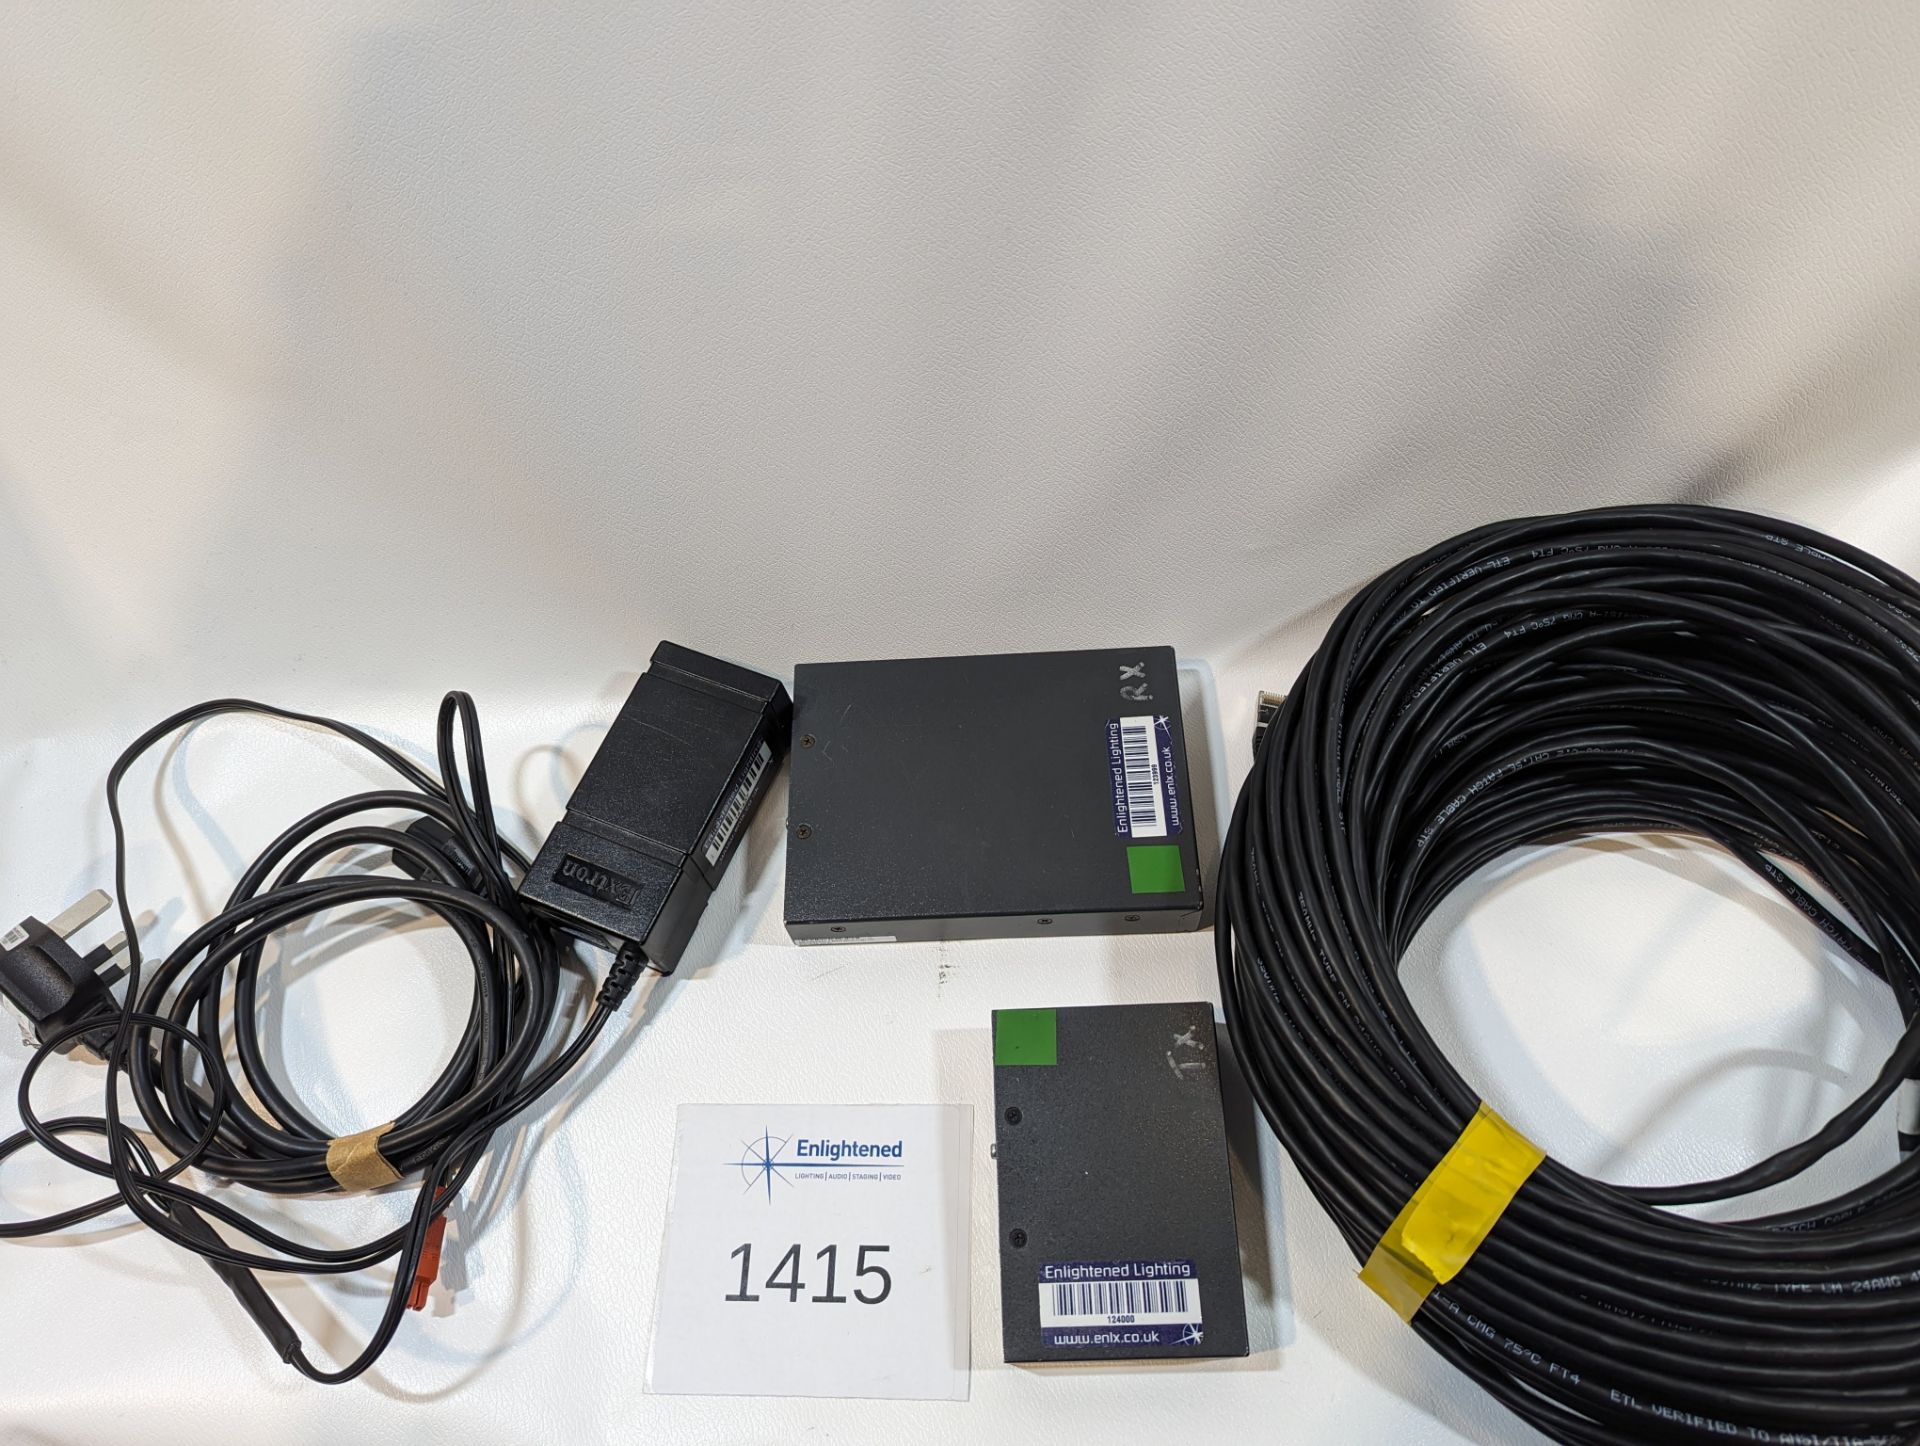 Extron hdmi over cat 5 330 Extended range kits inc 50m cat5 - Image 4 of 4